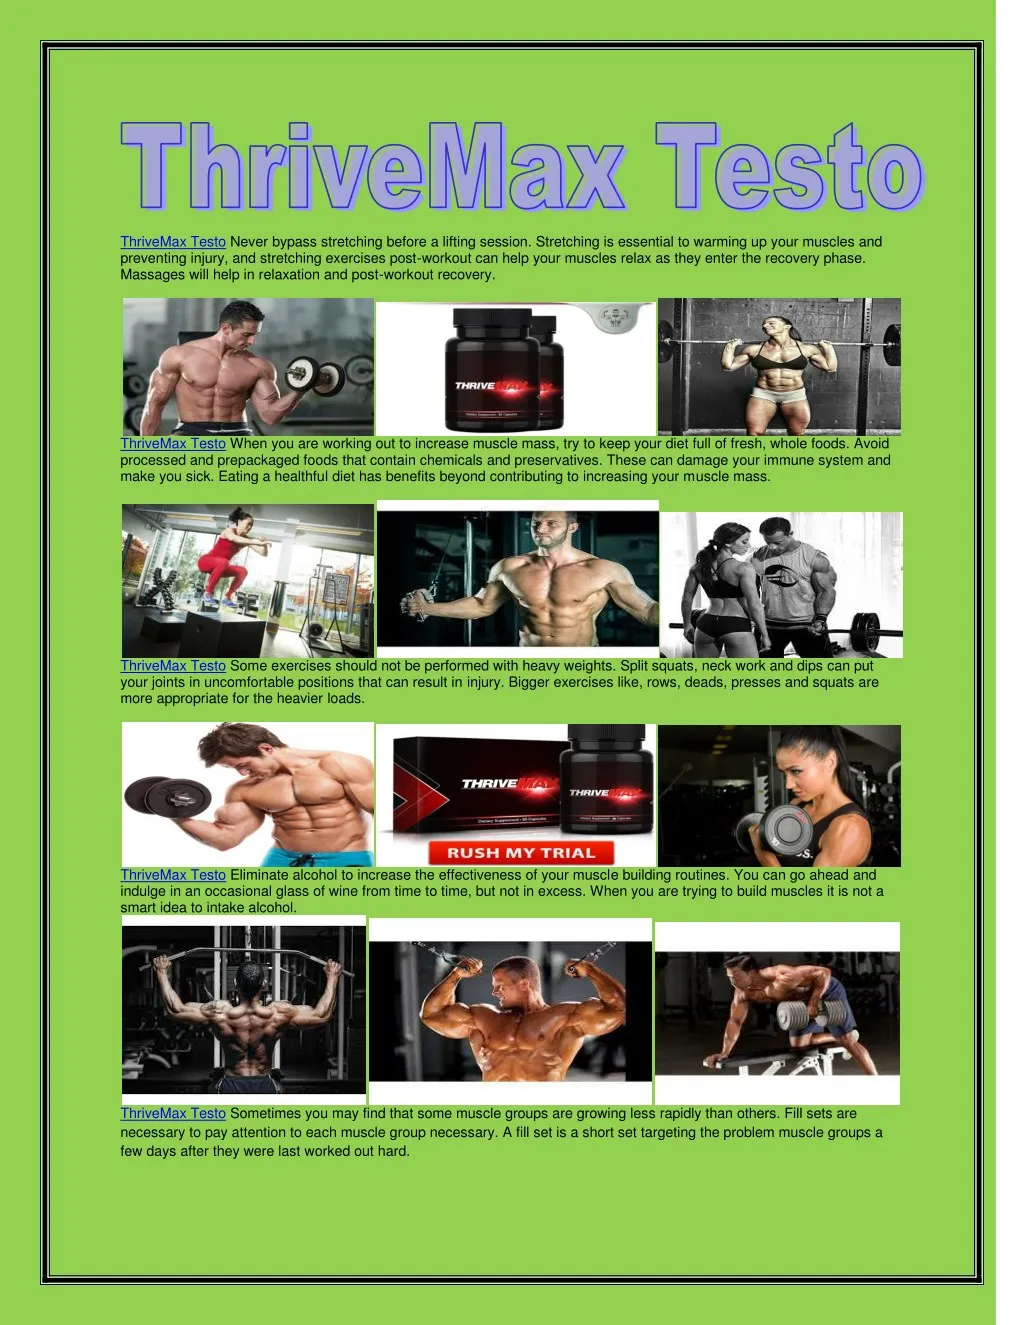 thrivemax testo never bypass stretching before